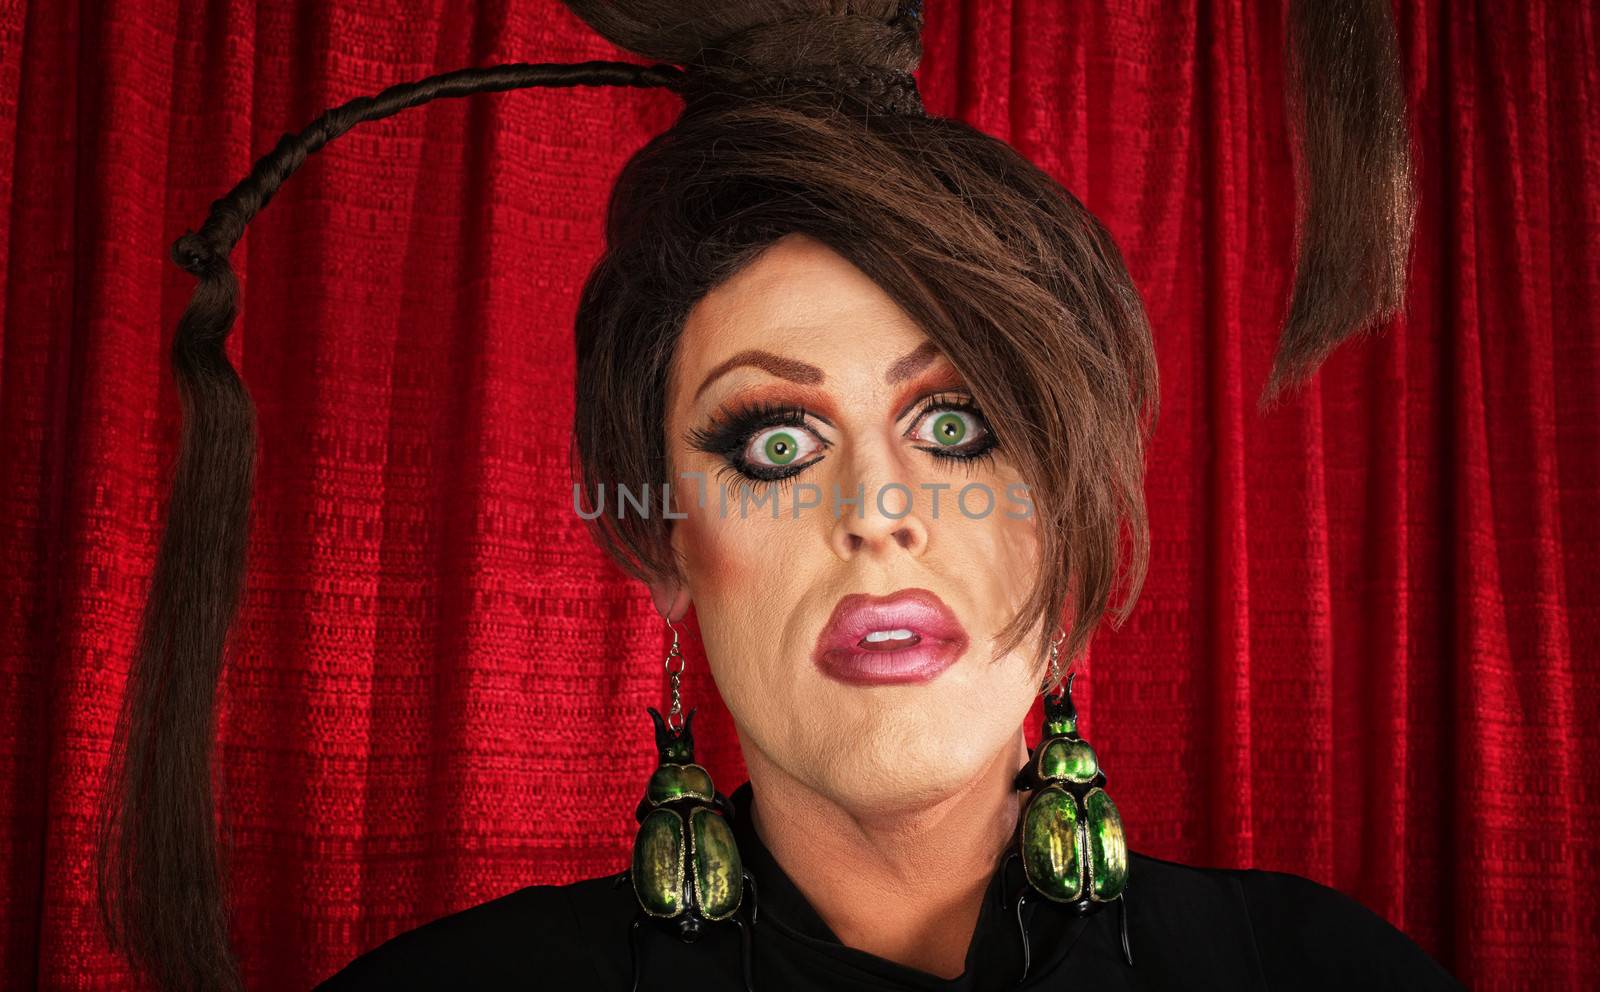 Spaced Out Drag Queen by Creatista